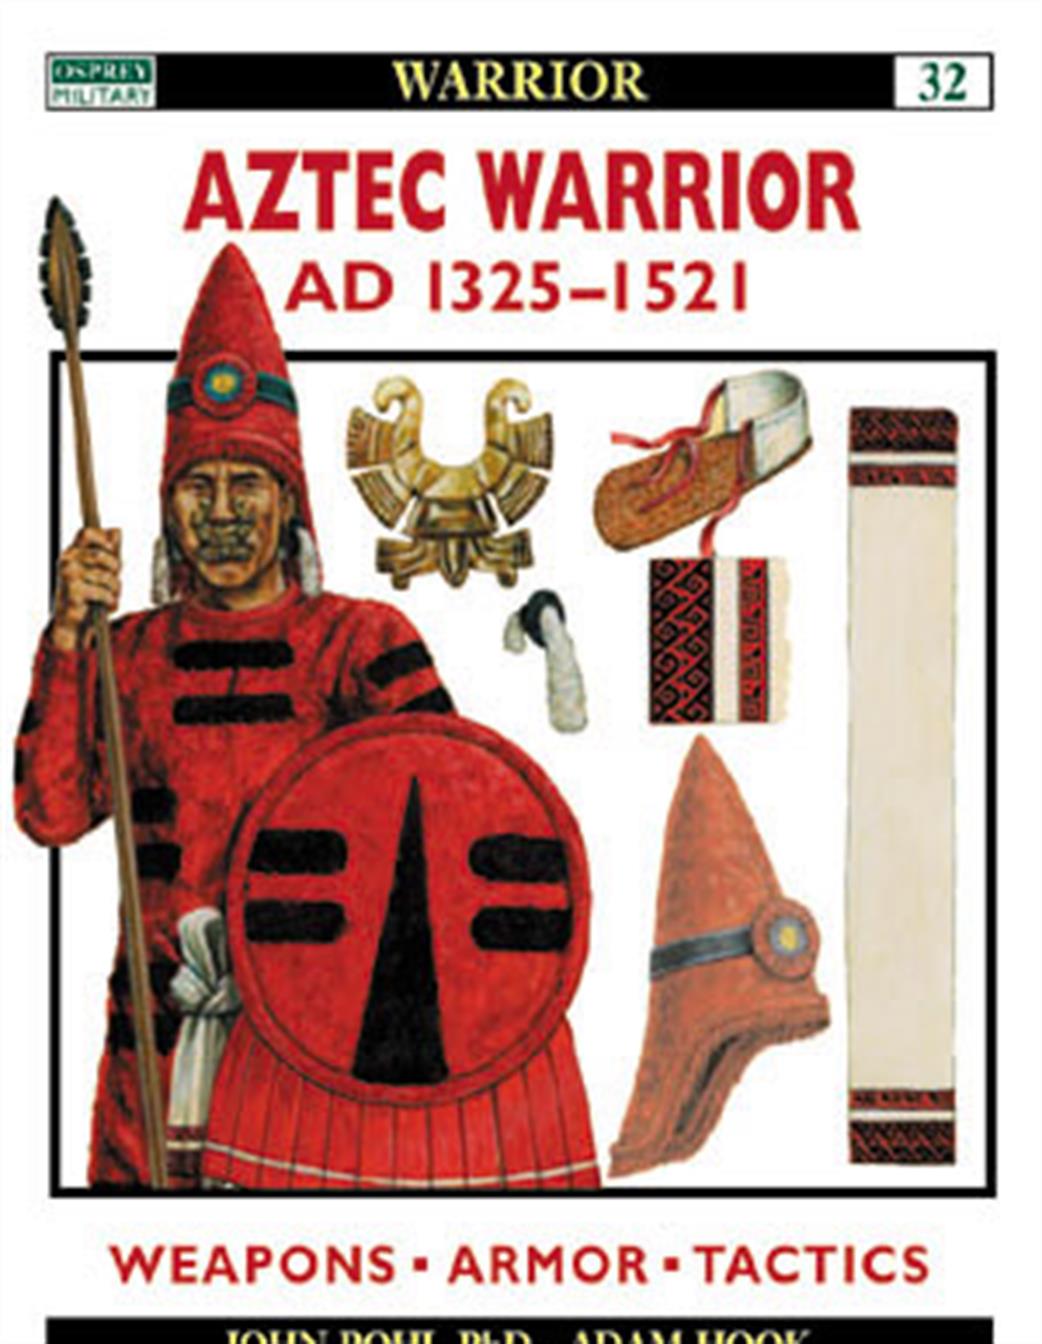 Osprey  1841761486 Aztec Warrior AD 1325-1521 Reference Book